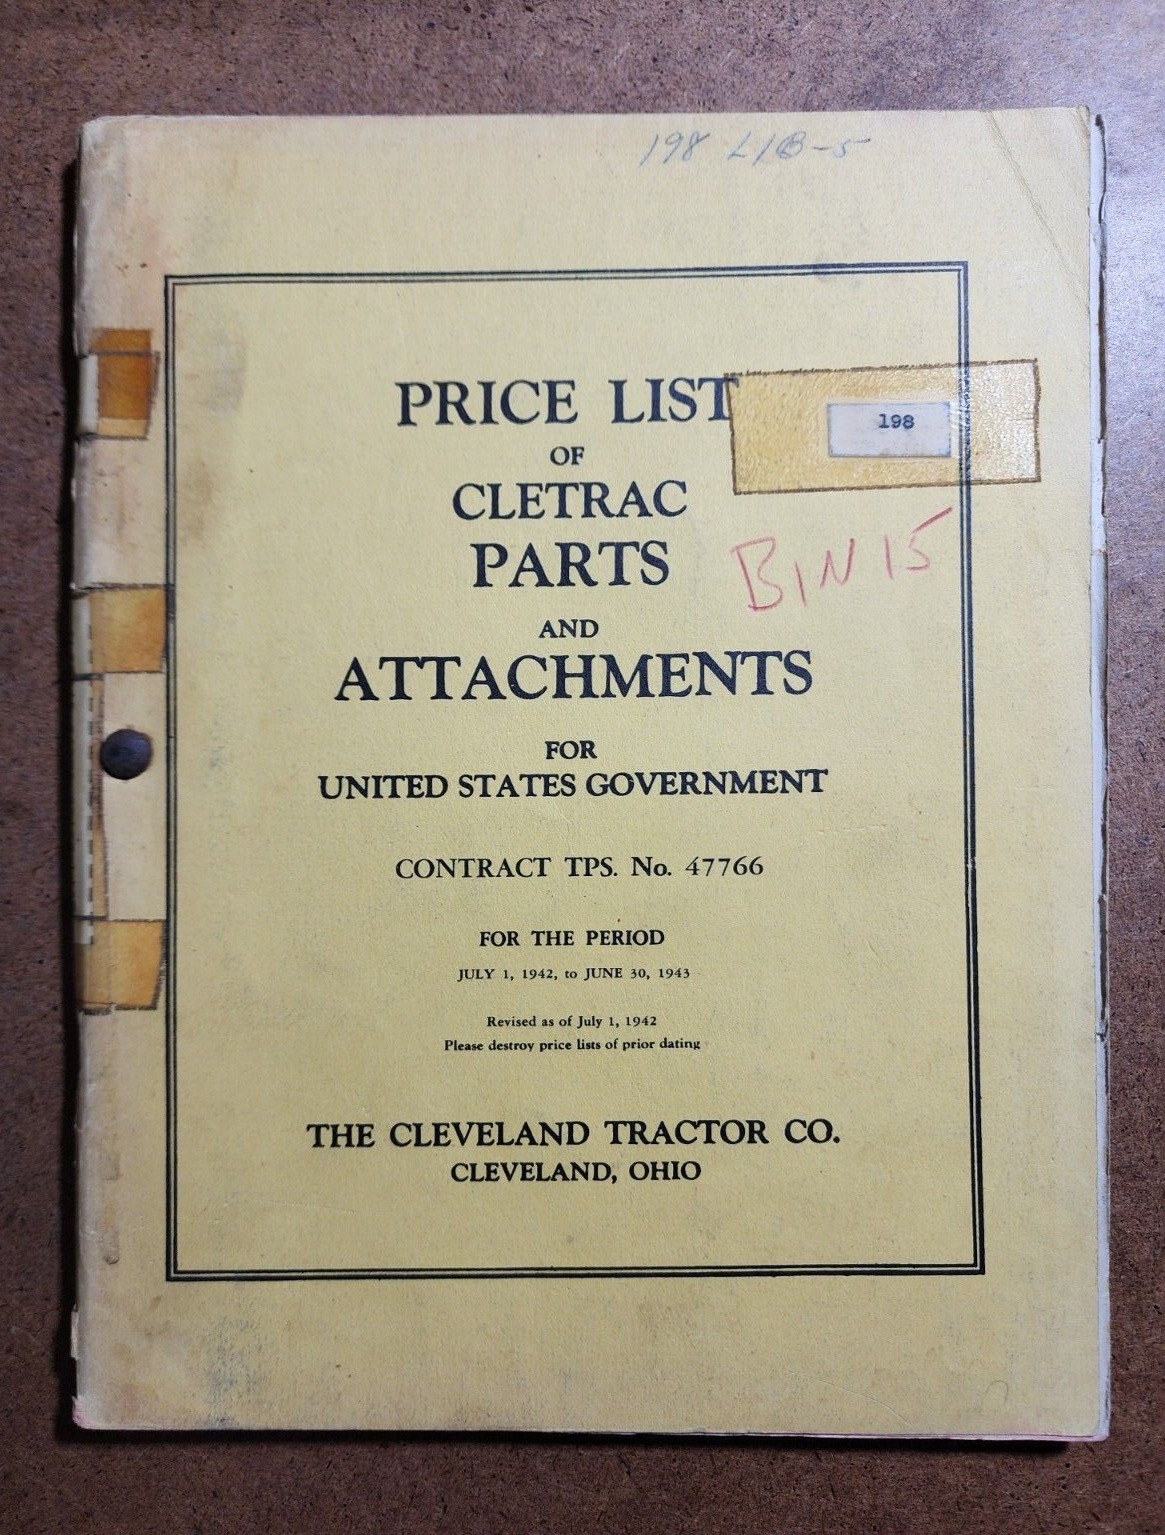 1943 CLEVELAND TRACTOR COOMPANY Price List of Cletrac Parts / U.S. Government